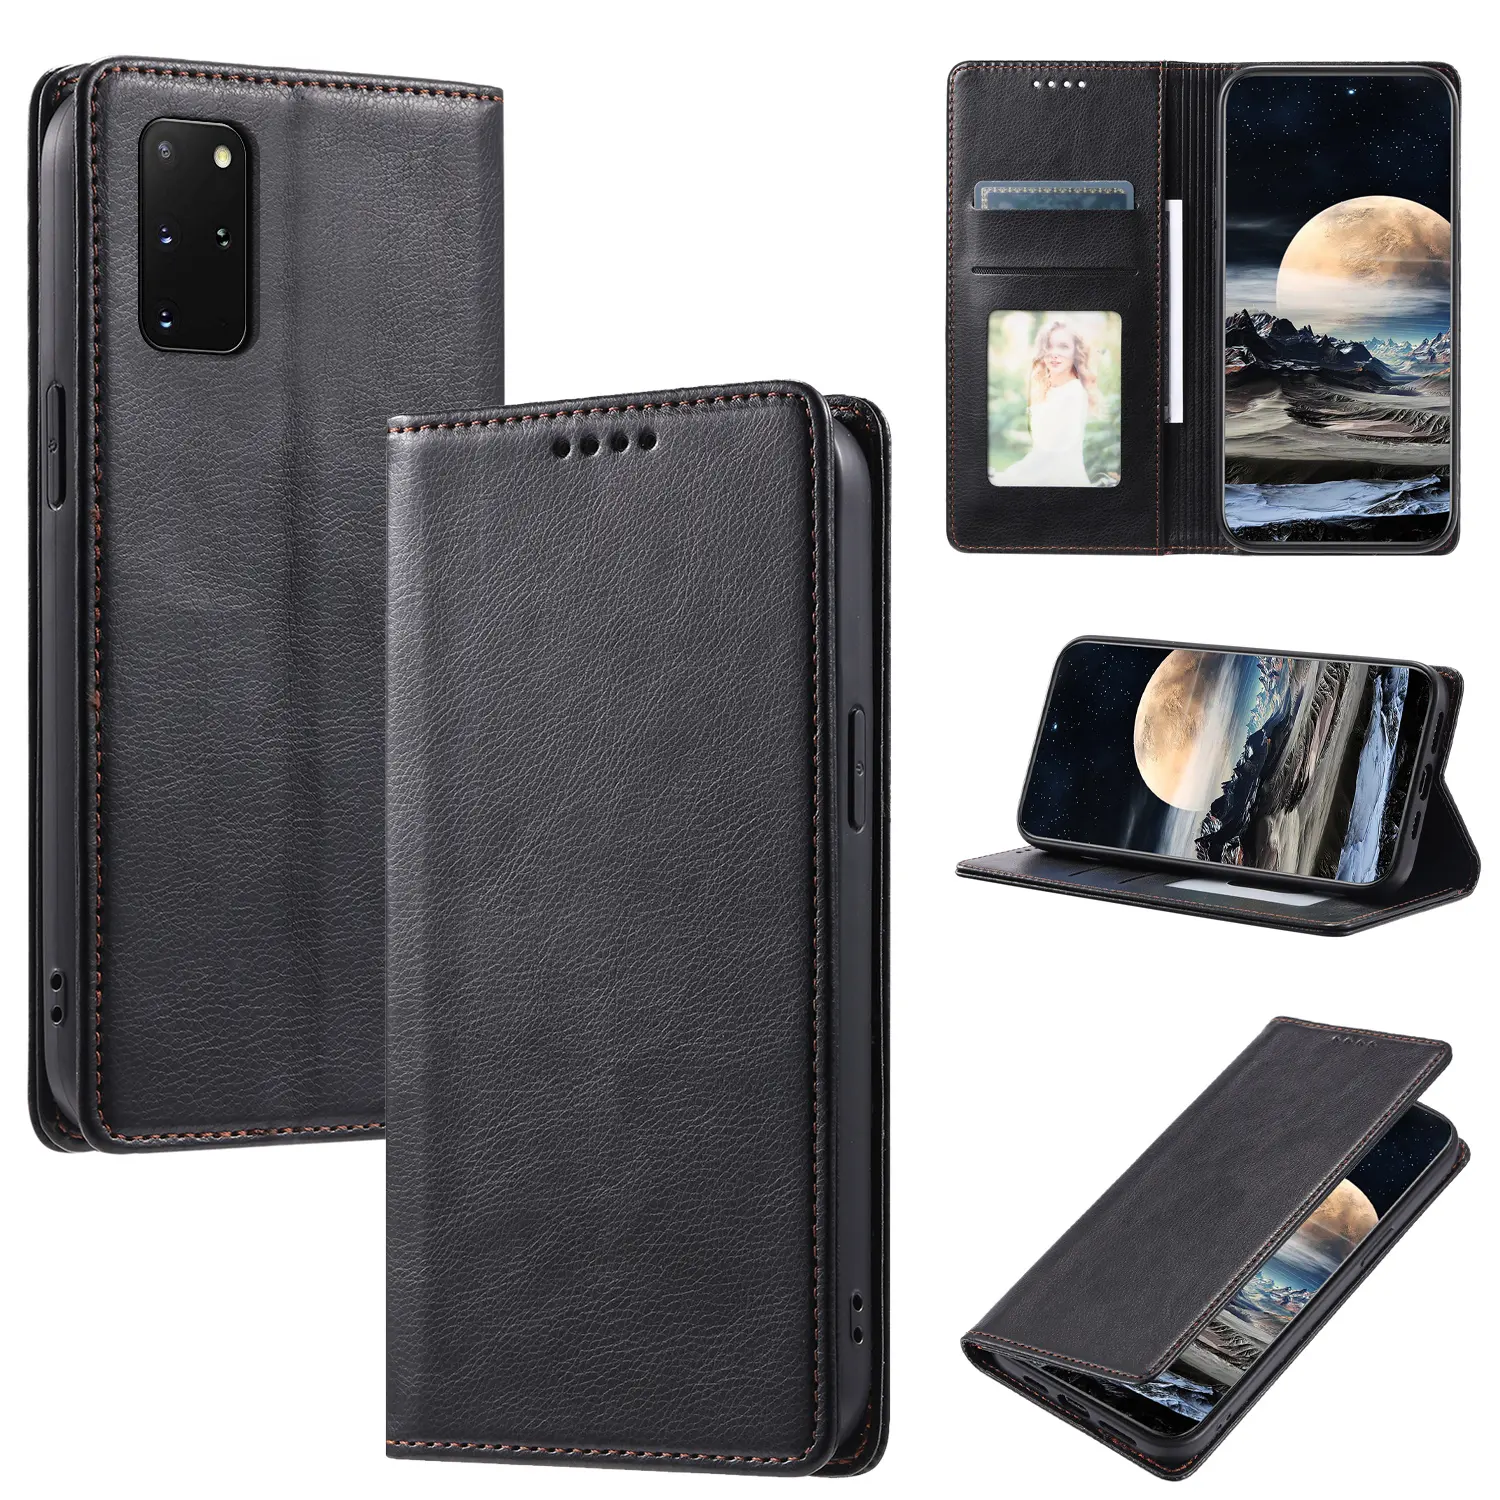 PU Leather Black Matte TPU Inner Wallet Card Cover Phone Case For Samsung Galaxy S20 FE S20+ S20 Ultra Series